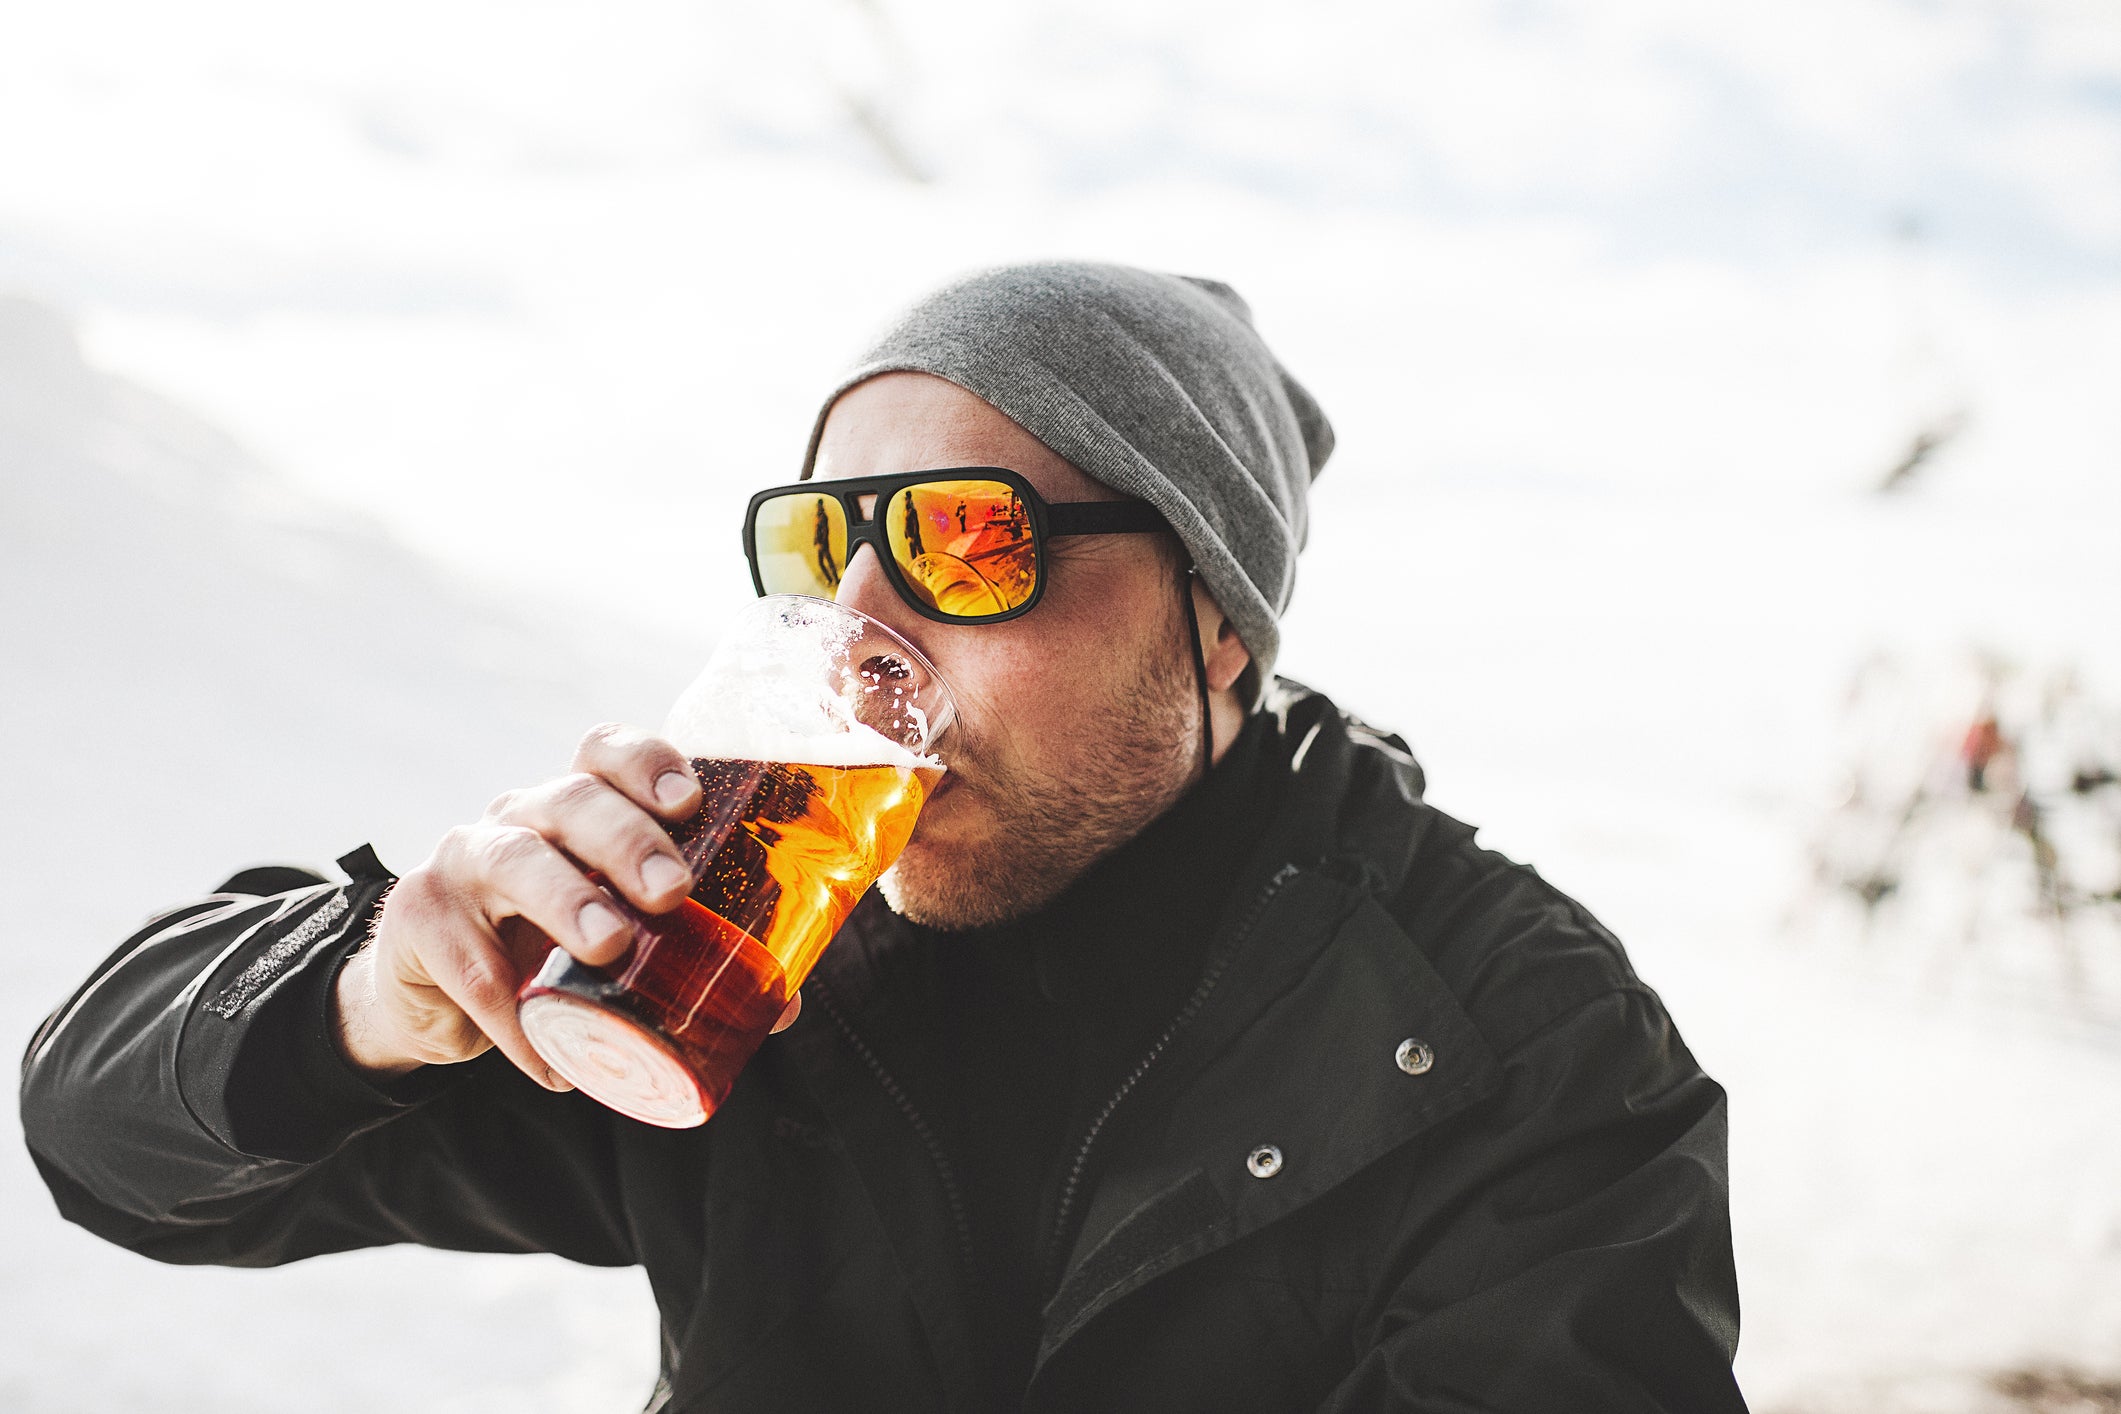 Alcohol is a common feature of ski holidays